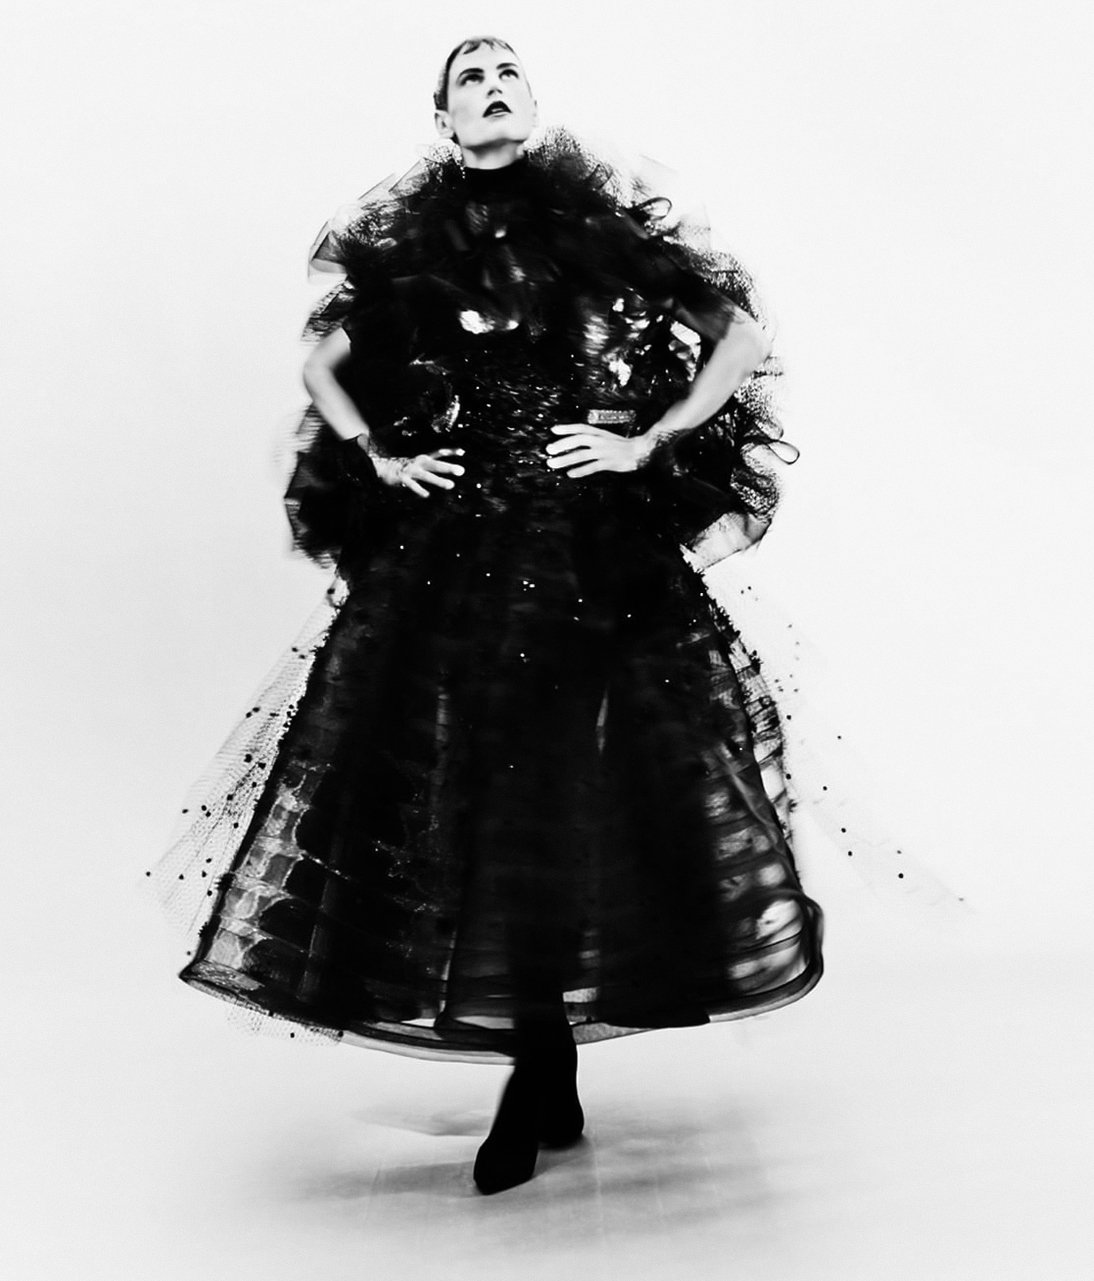 Paolo-Roversi-fall-couture-in-d-Magazine00006.jpeg